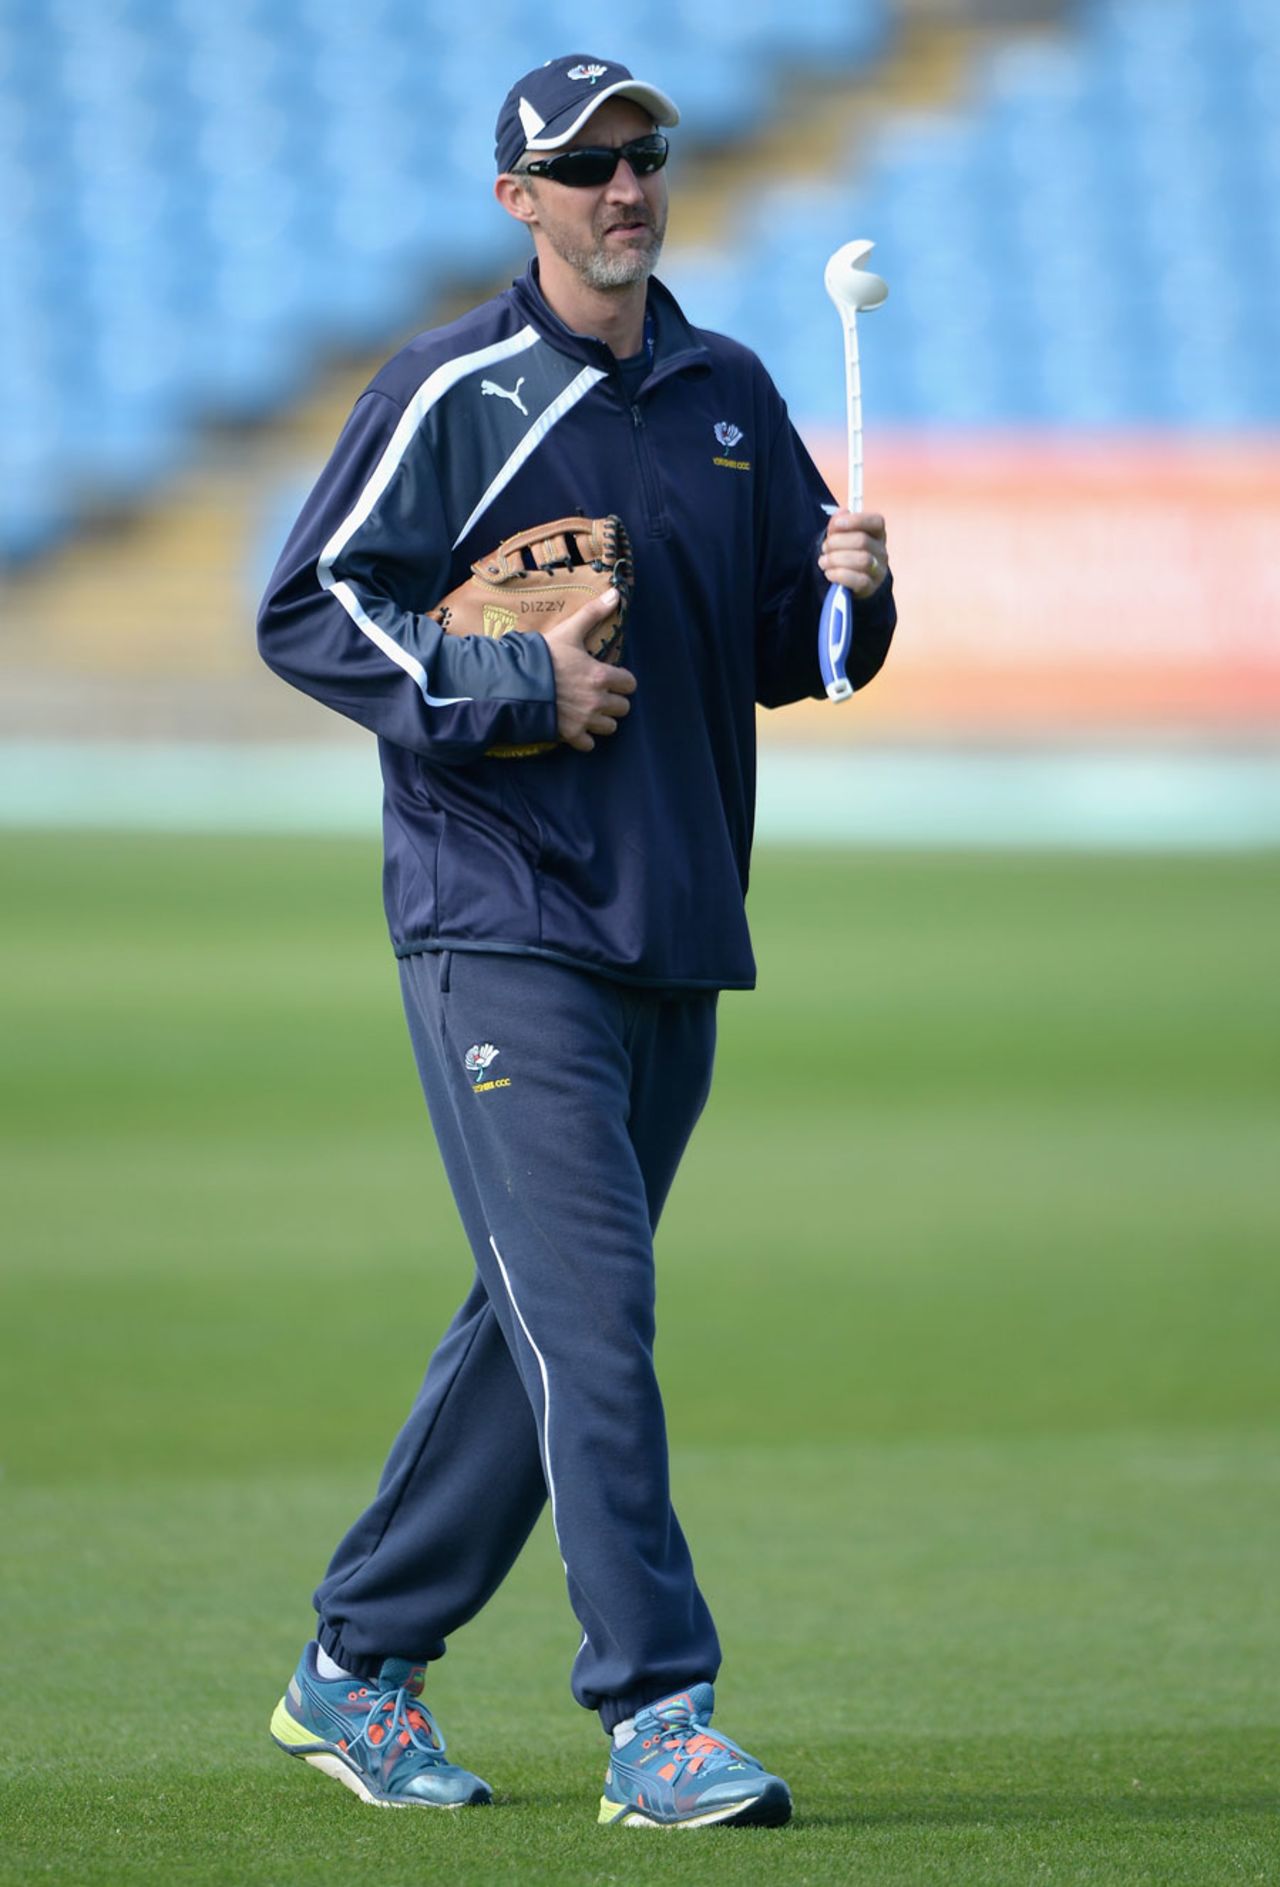 Jason Gillespie on the outfield before the start of play, Yorkshire v Northamptonshire, County Championship, Division One, Headingley, 4th day, April 23, 2014